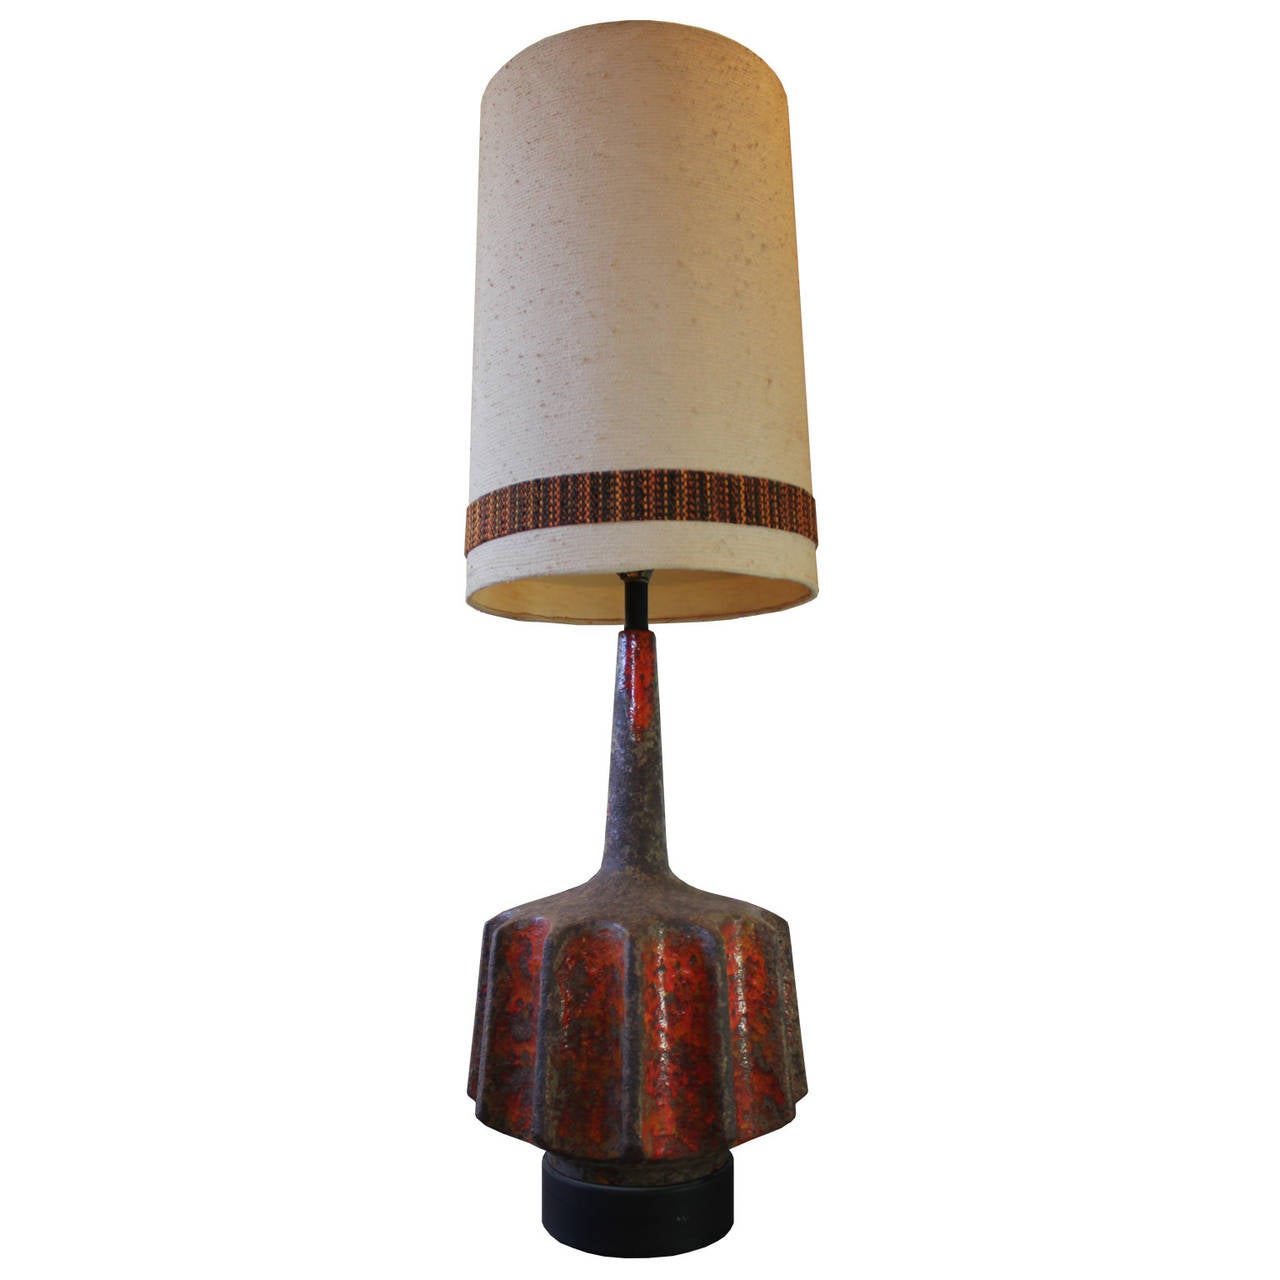 Great Large lava glaze brutalist orange lamp with original shade. Lamp has a unique Scalloped edge and is in excellent vintage condition.